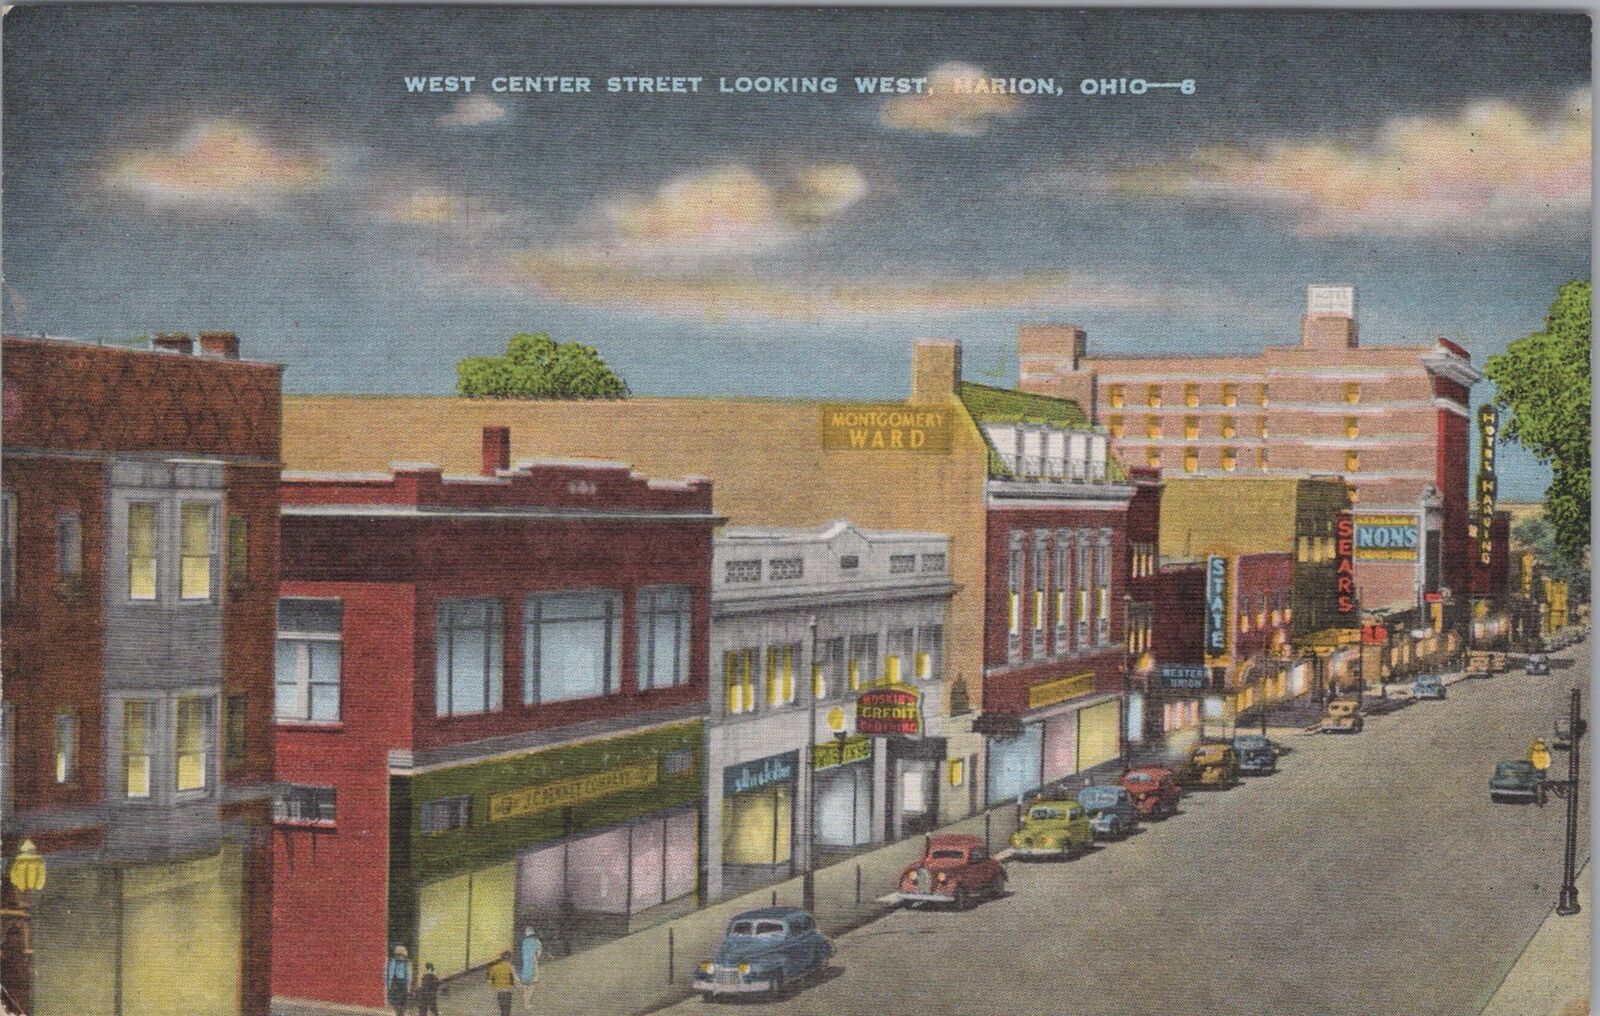 West Center Street Looking West, Marion Ohio Postcard